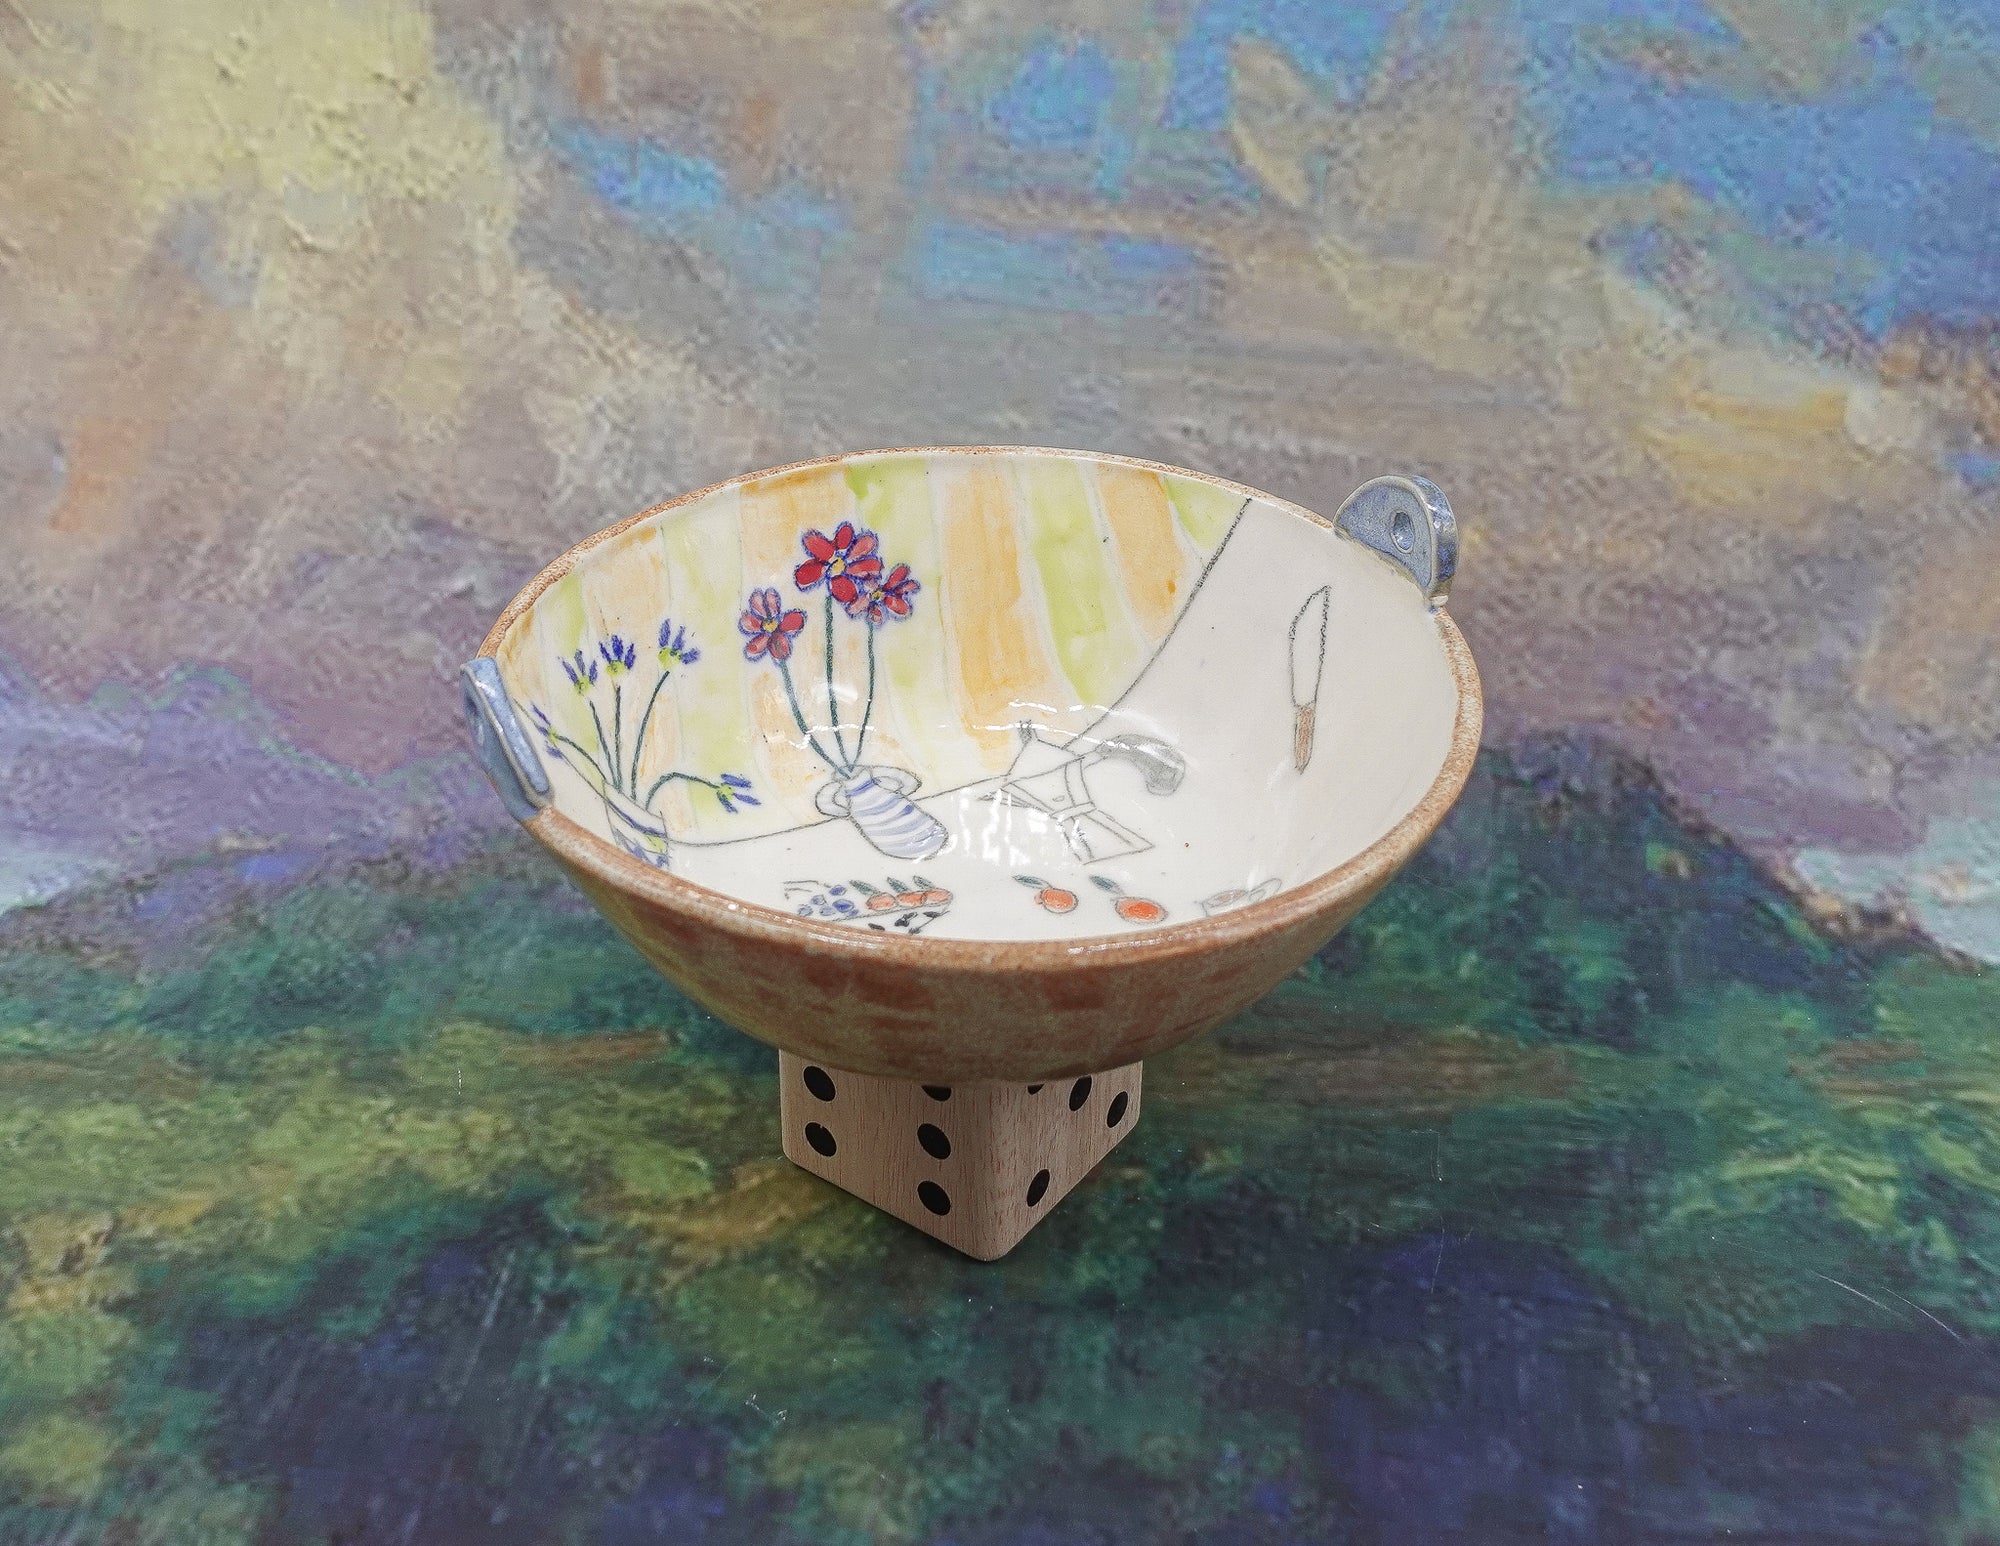 Still Life Bowl with Handles